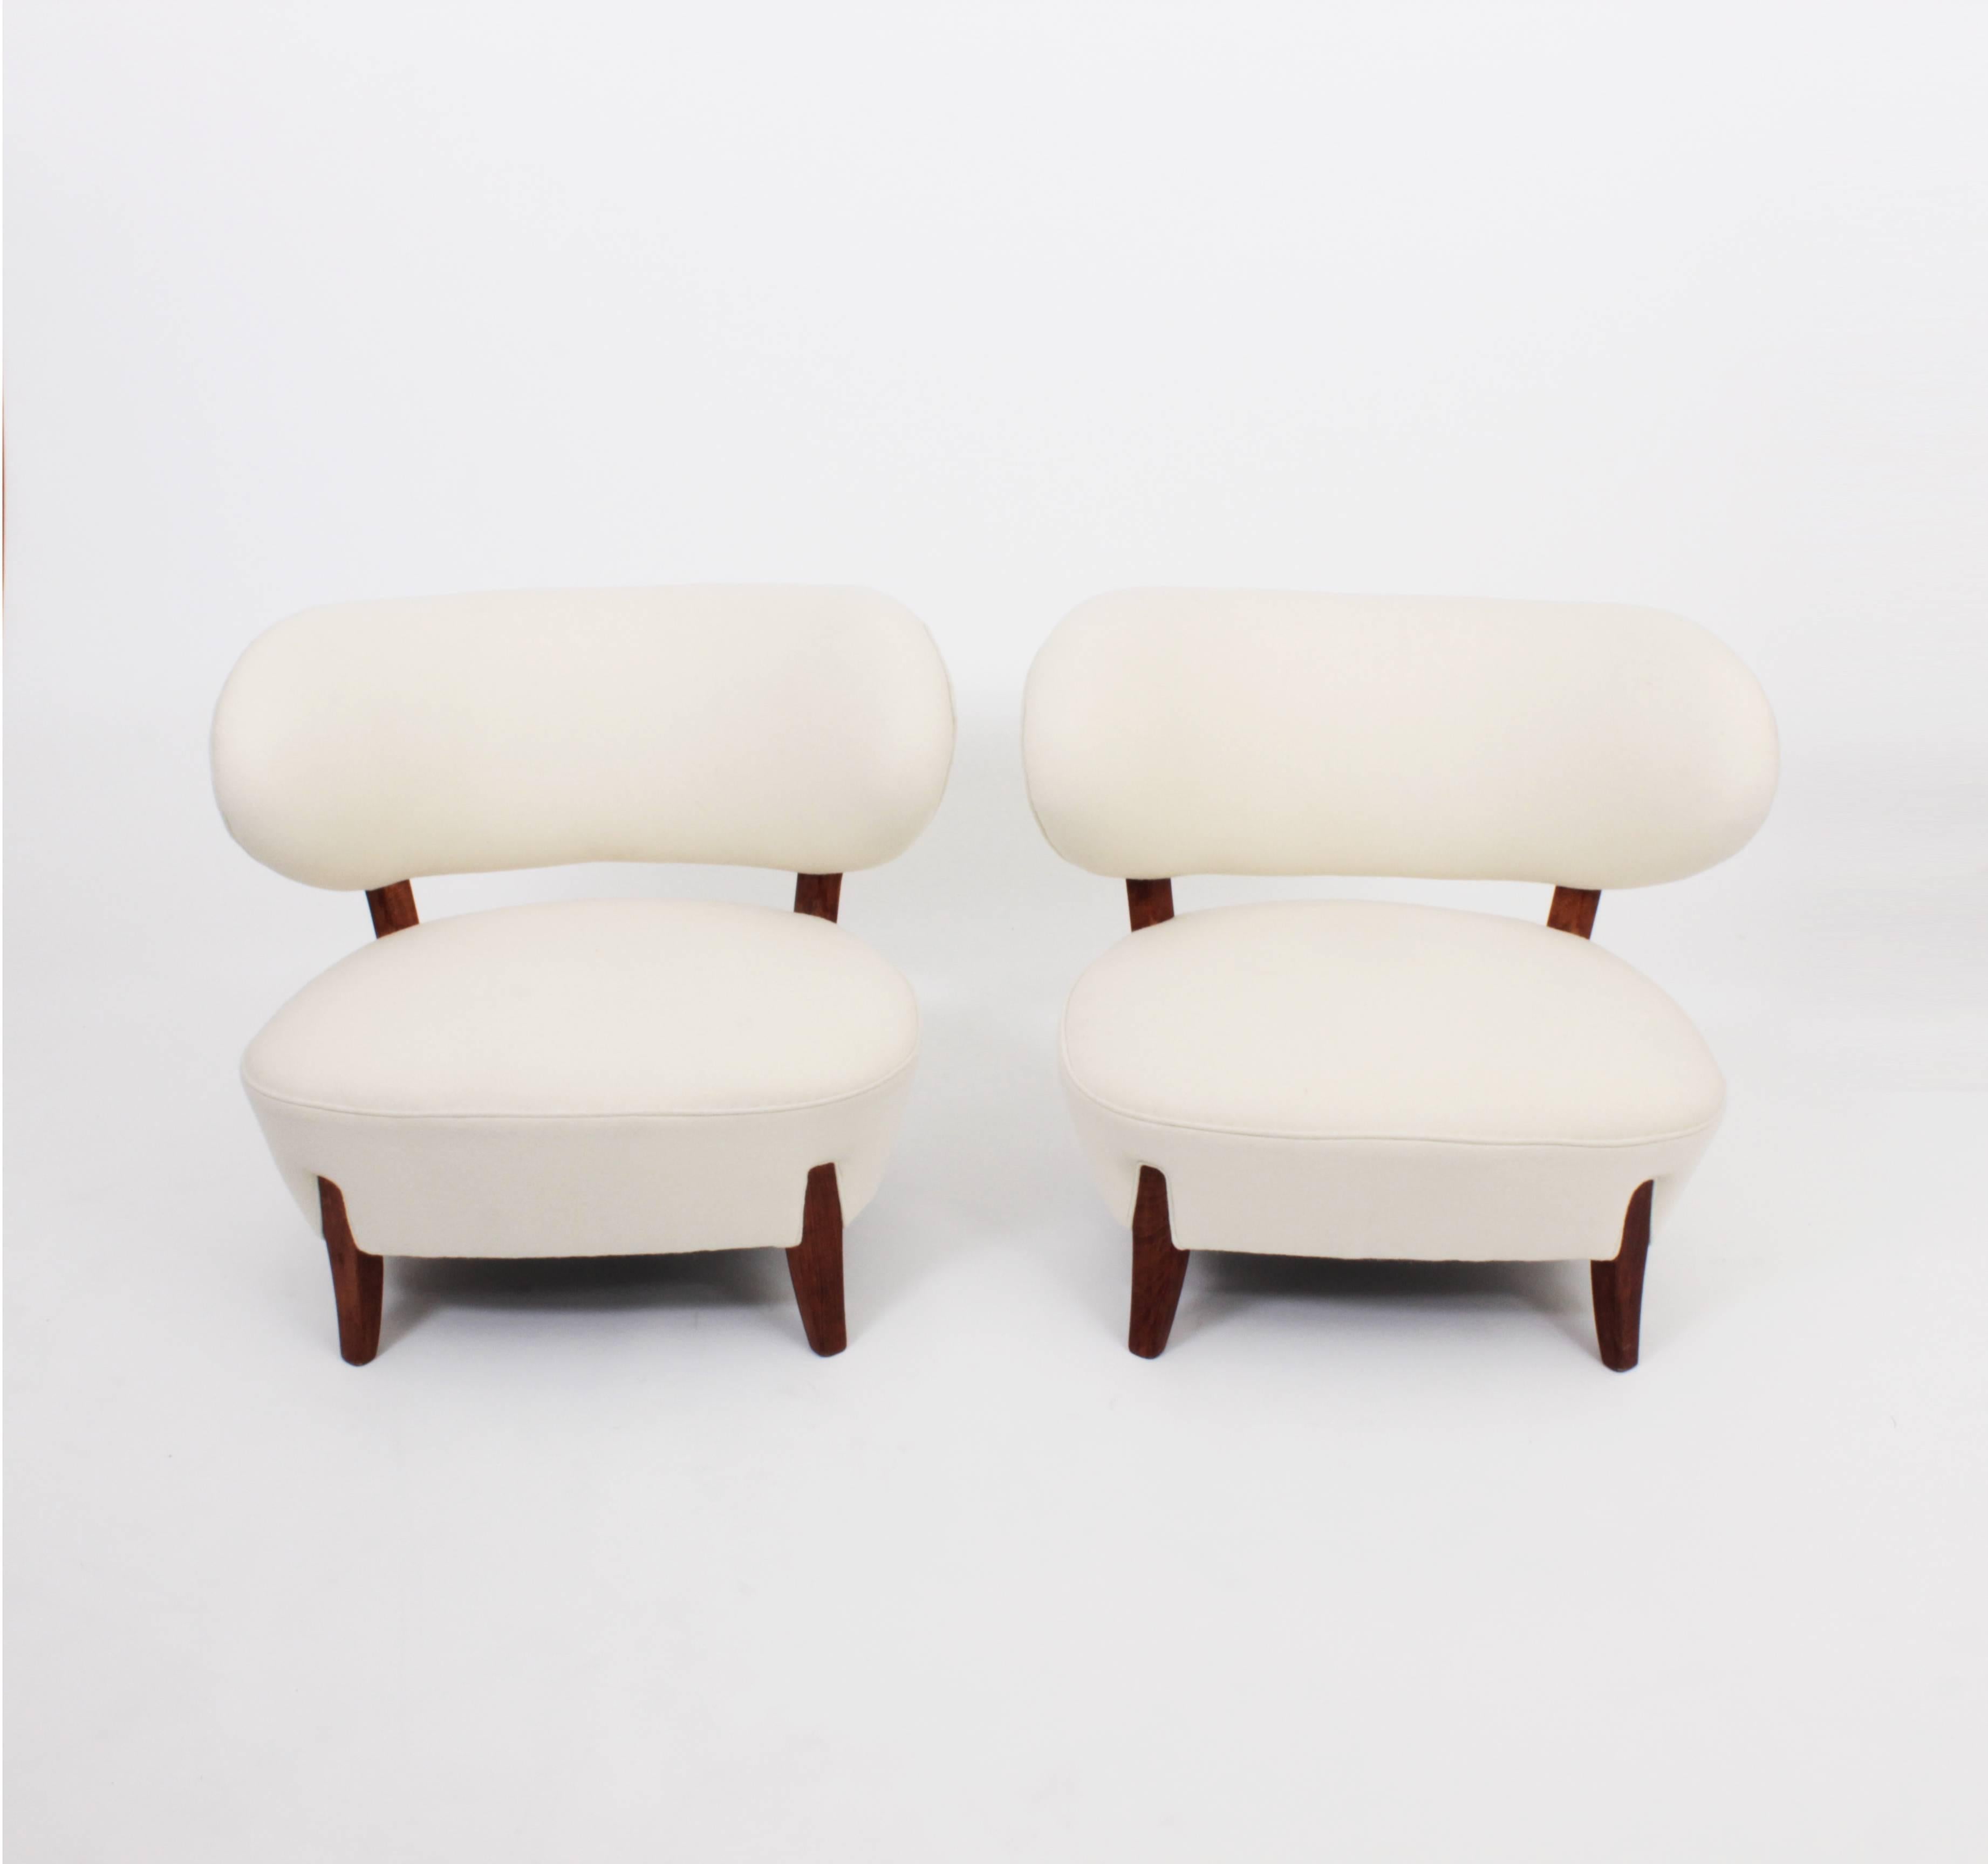 Pair of easy chairs designed by Otto Schulz and made by Boet, in Sweden, circa 1940. Newly upholstered in white woolen fabric by Kvadrat, beech legs.
 